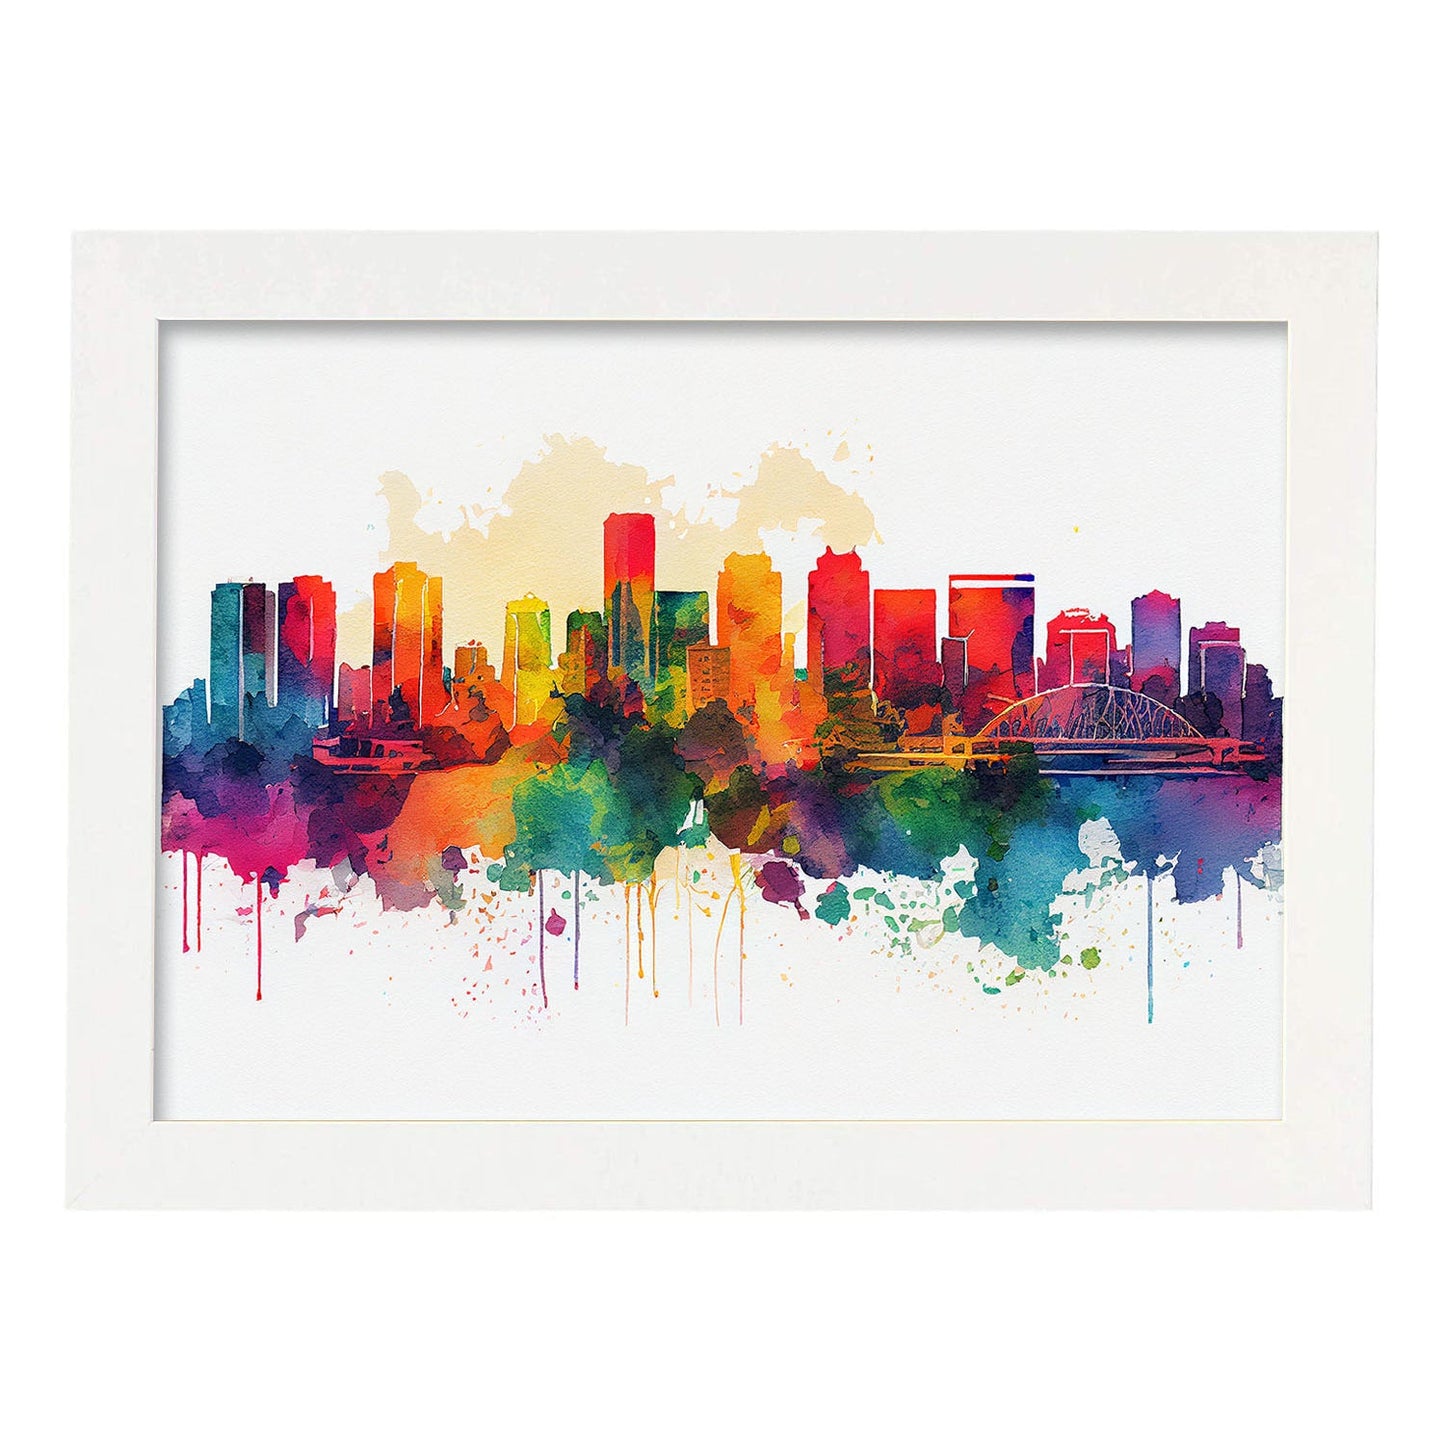 Nacnic watercolor of a skyline of the city of Honolulu. Aesthetic Wall Art Prints for Bedroom or Living Room Design.-Artwork-Nacnic-A4-Marco Blanco-Nacnic Estudio SL